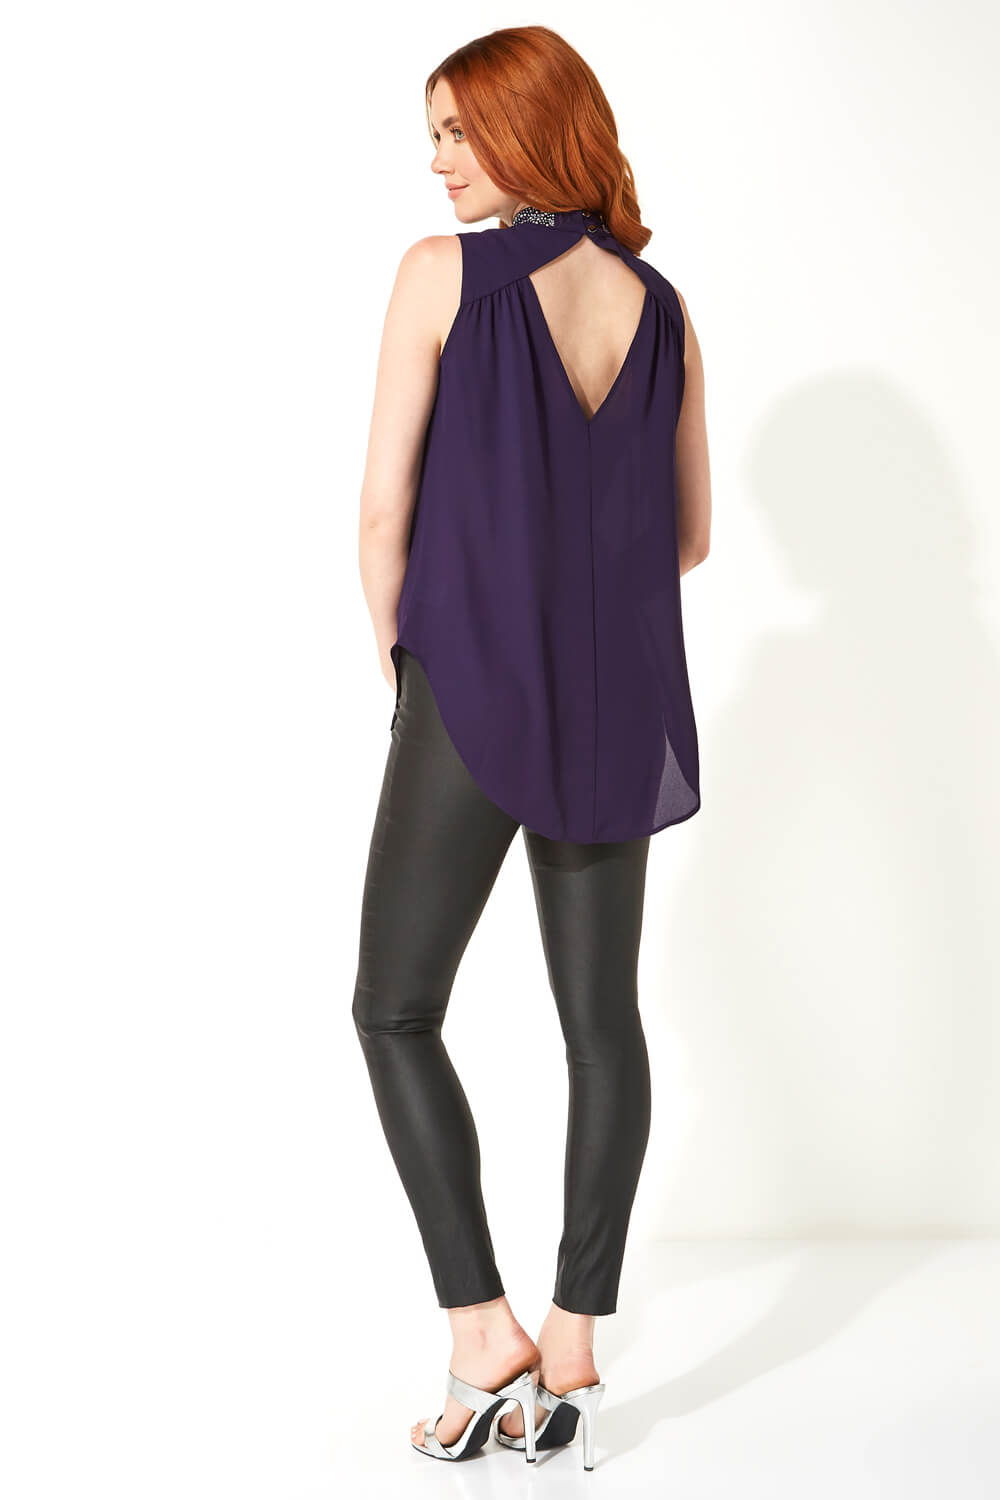 Purple Diamante Embellished High Neck Top, Image 3 of 5